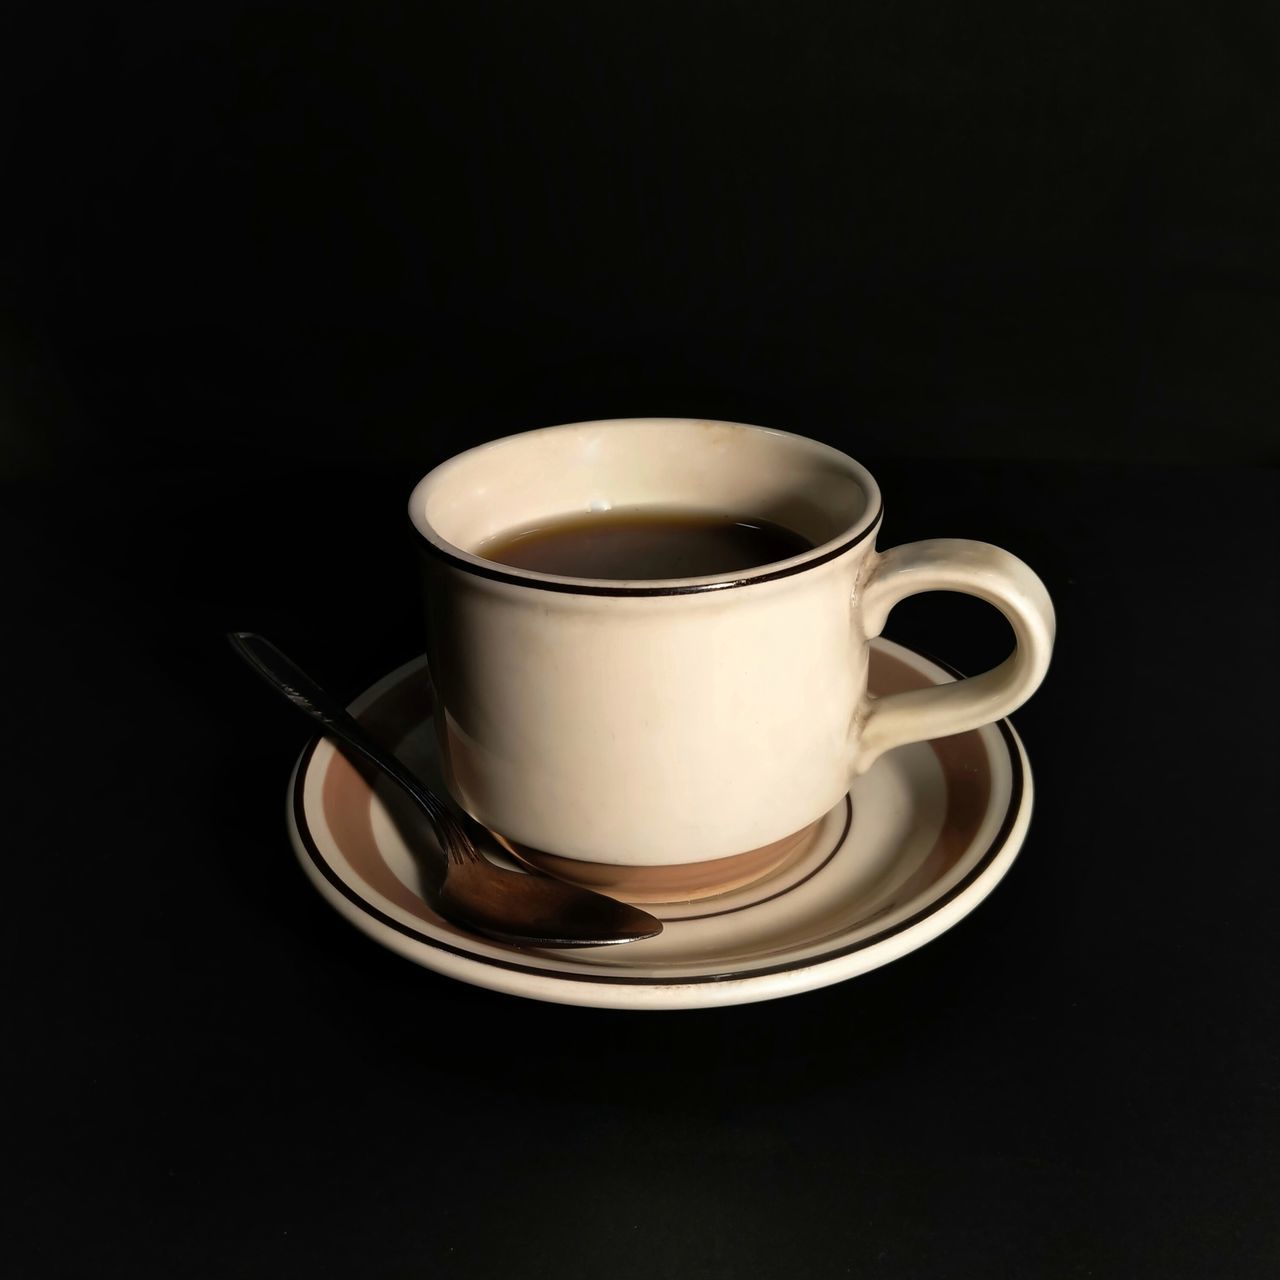 CLOSE-UP OF COFFEE CUP ON TABLE